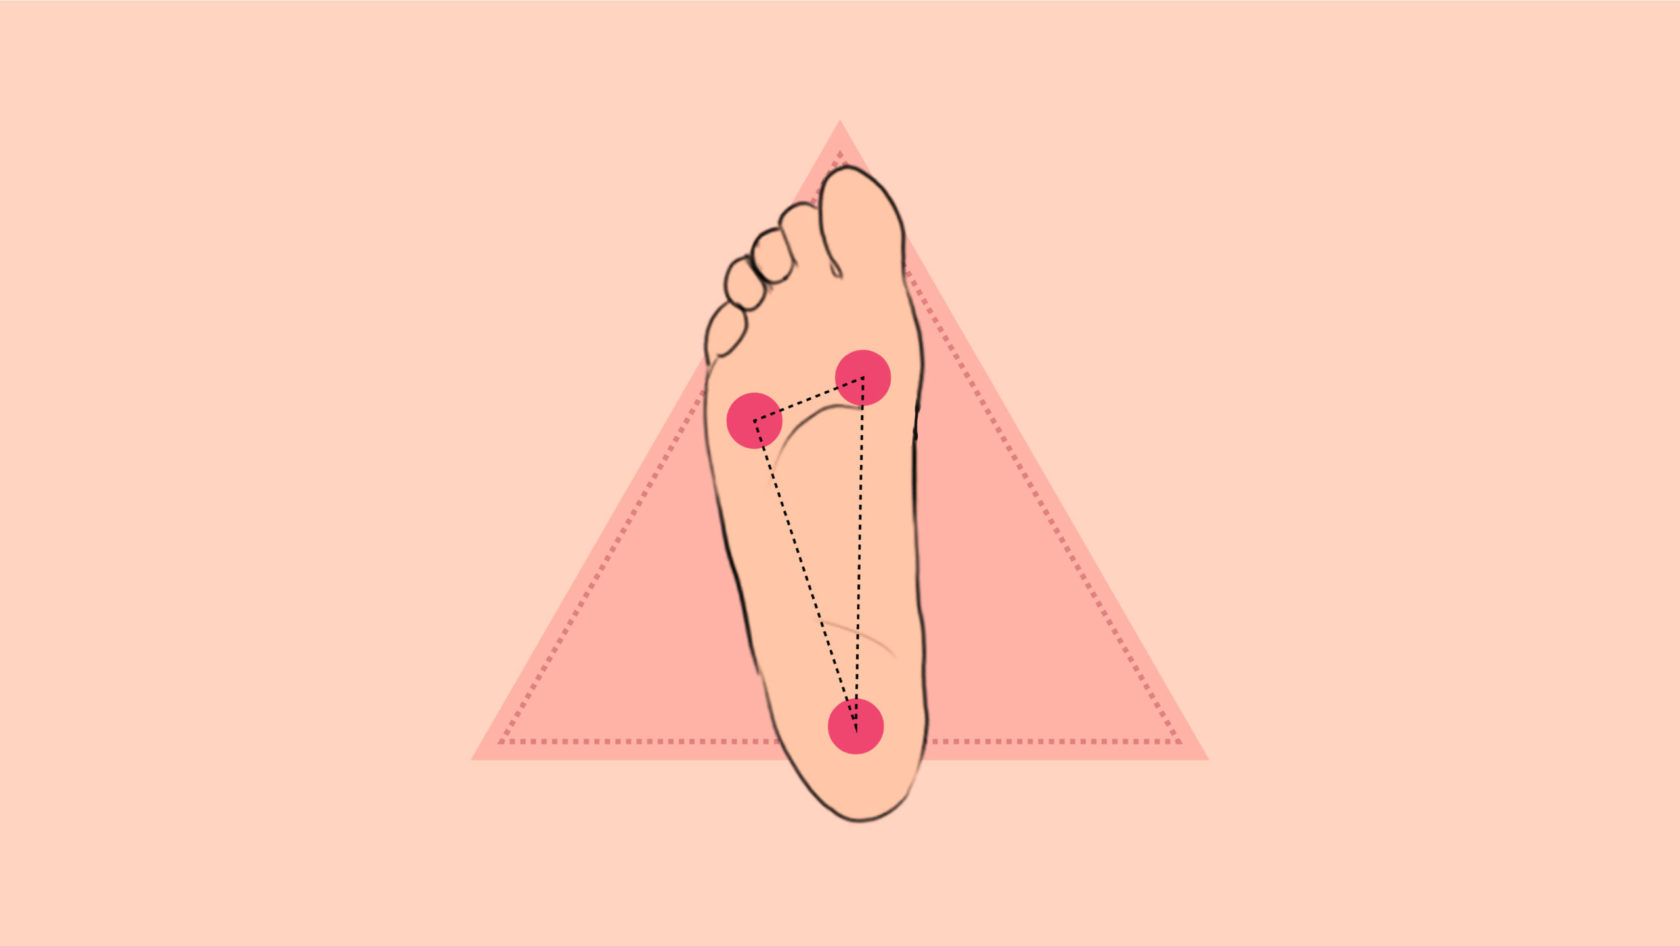 The Triangle of the Foot